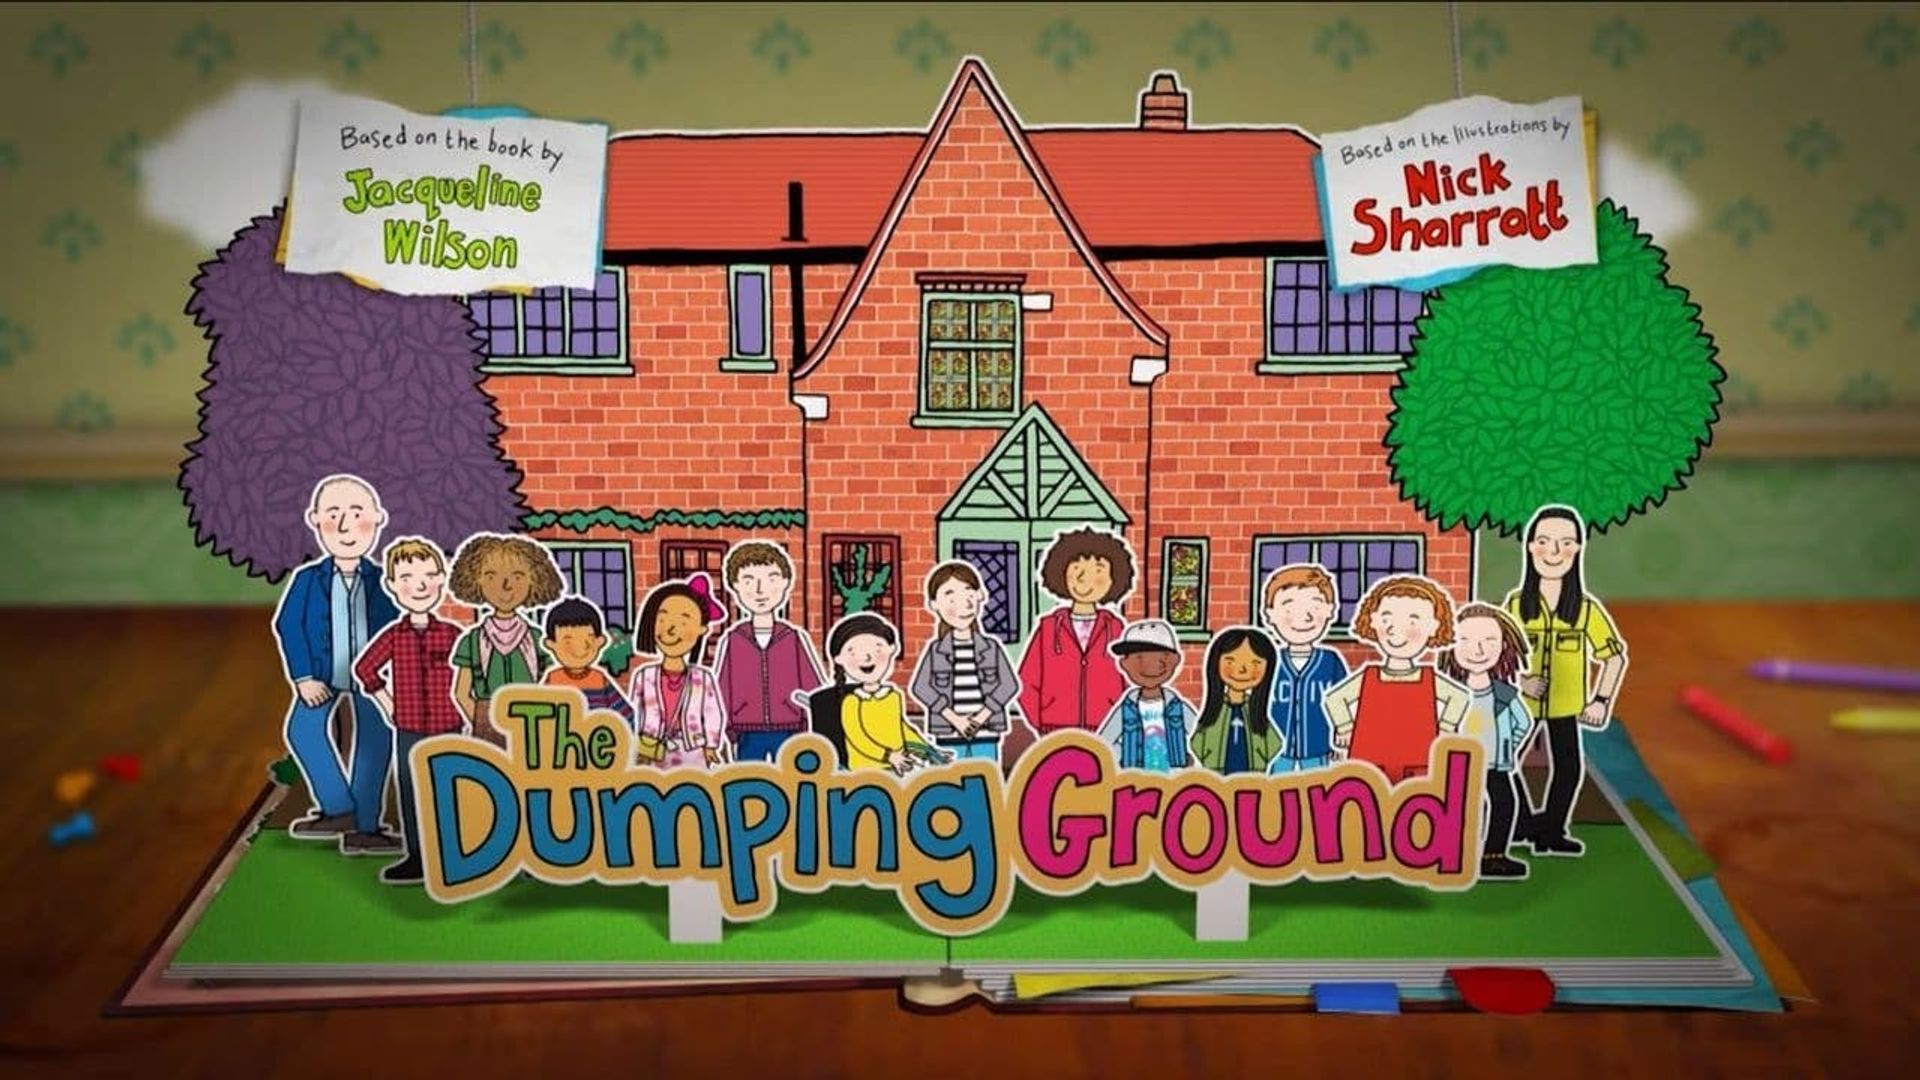 The Dumping Ground background